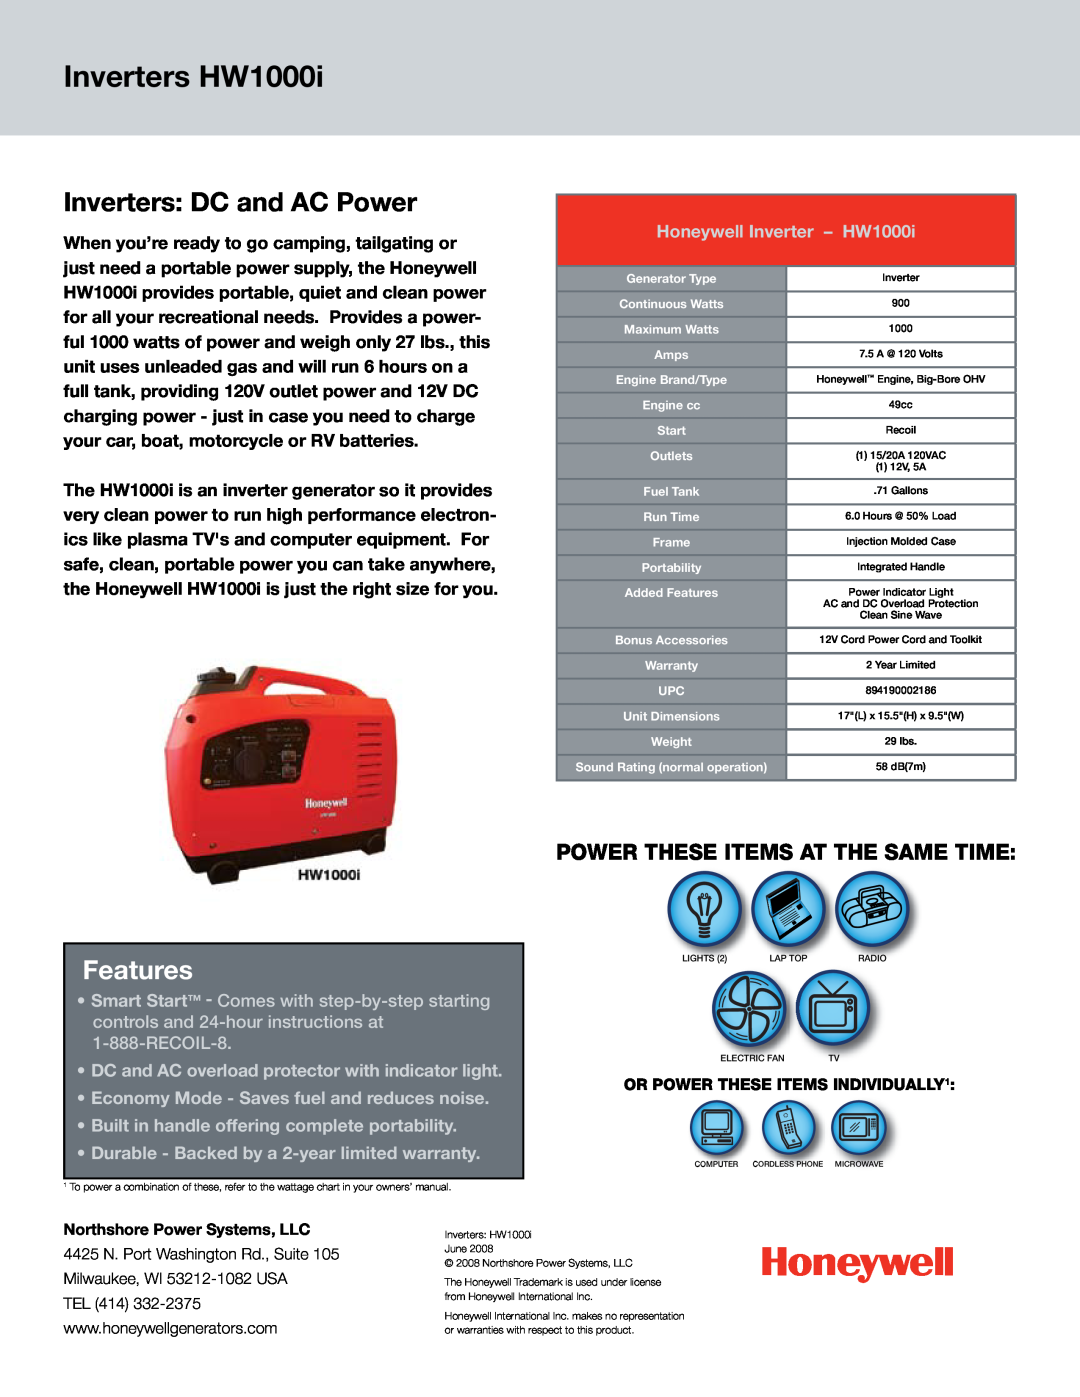 Honeywell manual Inverters HW1000i, Inverters DC and AC Power, Features, Power These Items At The Same Time 